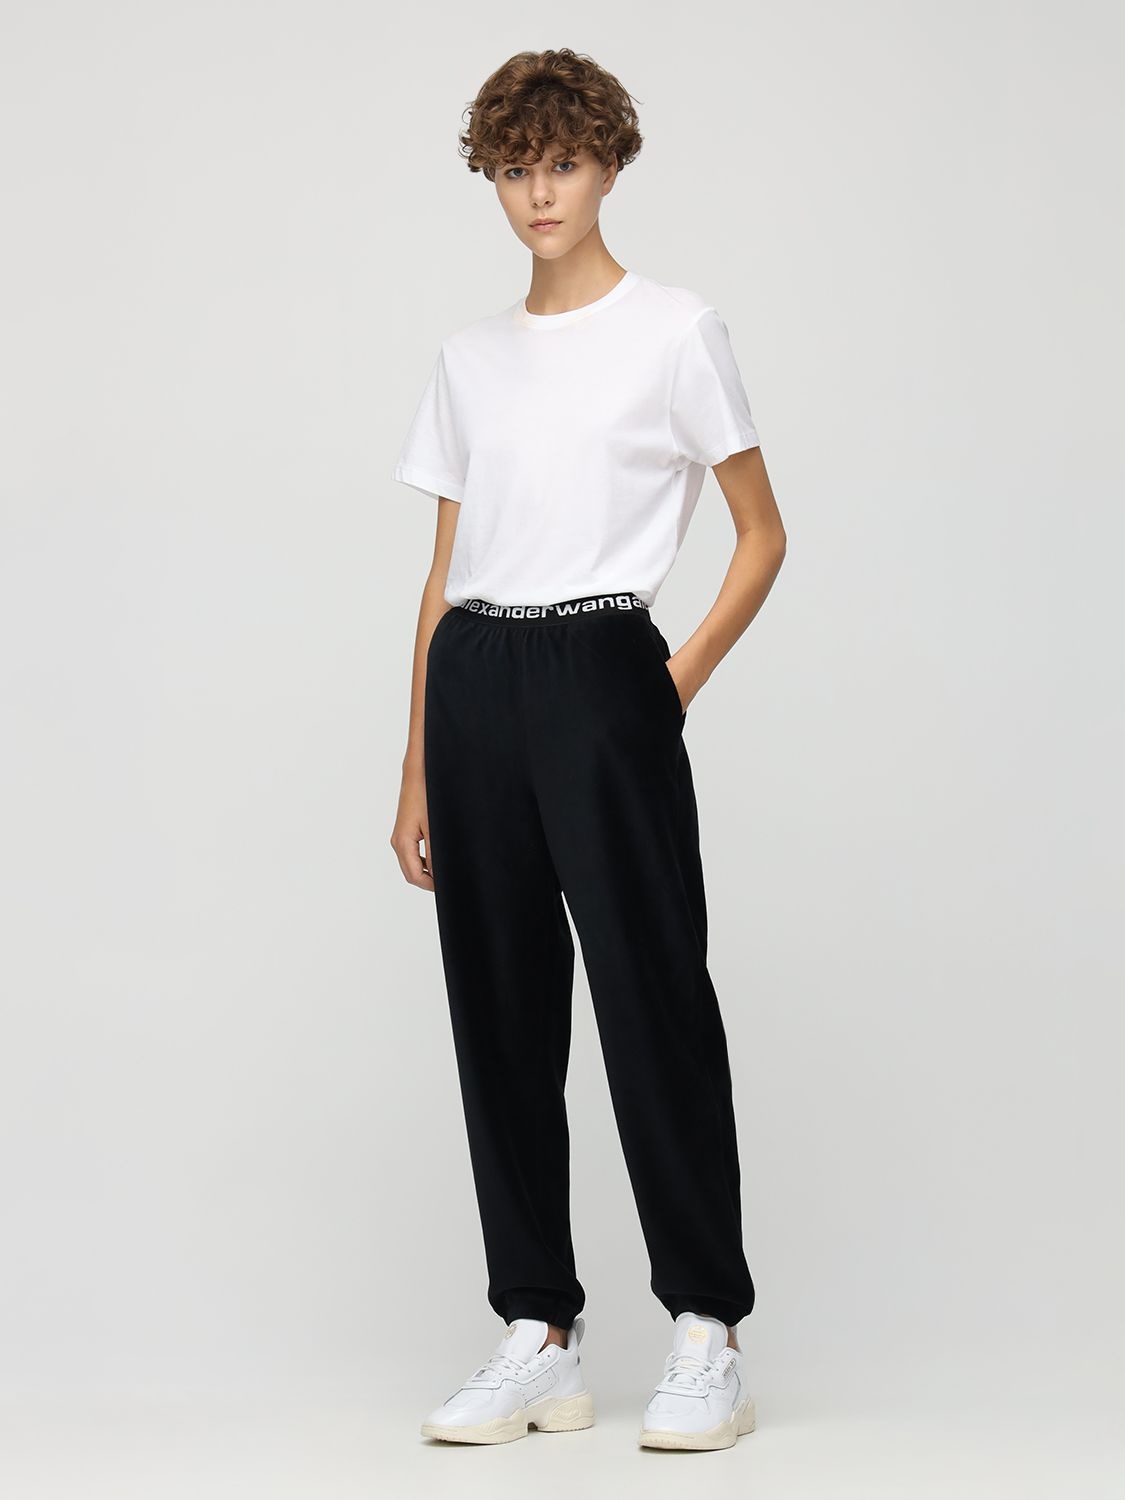 Alexander Wang Stretch Corduroy Pant With Logo Elastic In Black